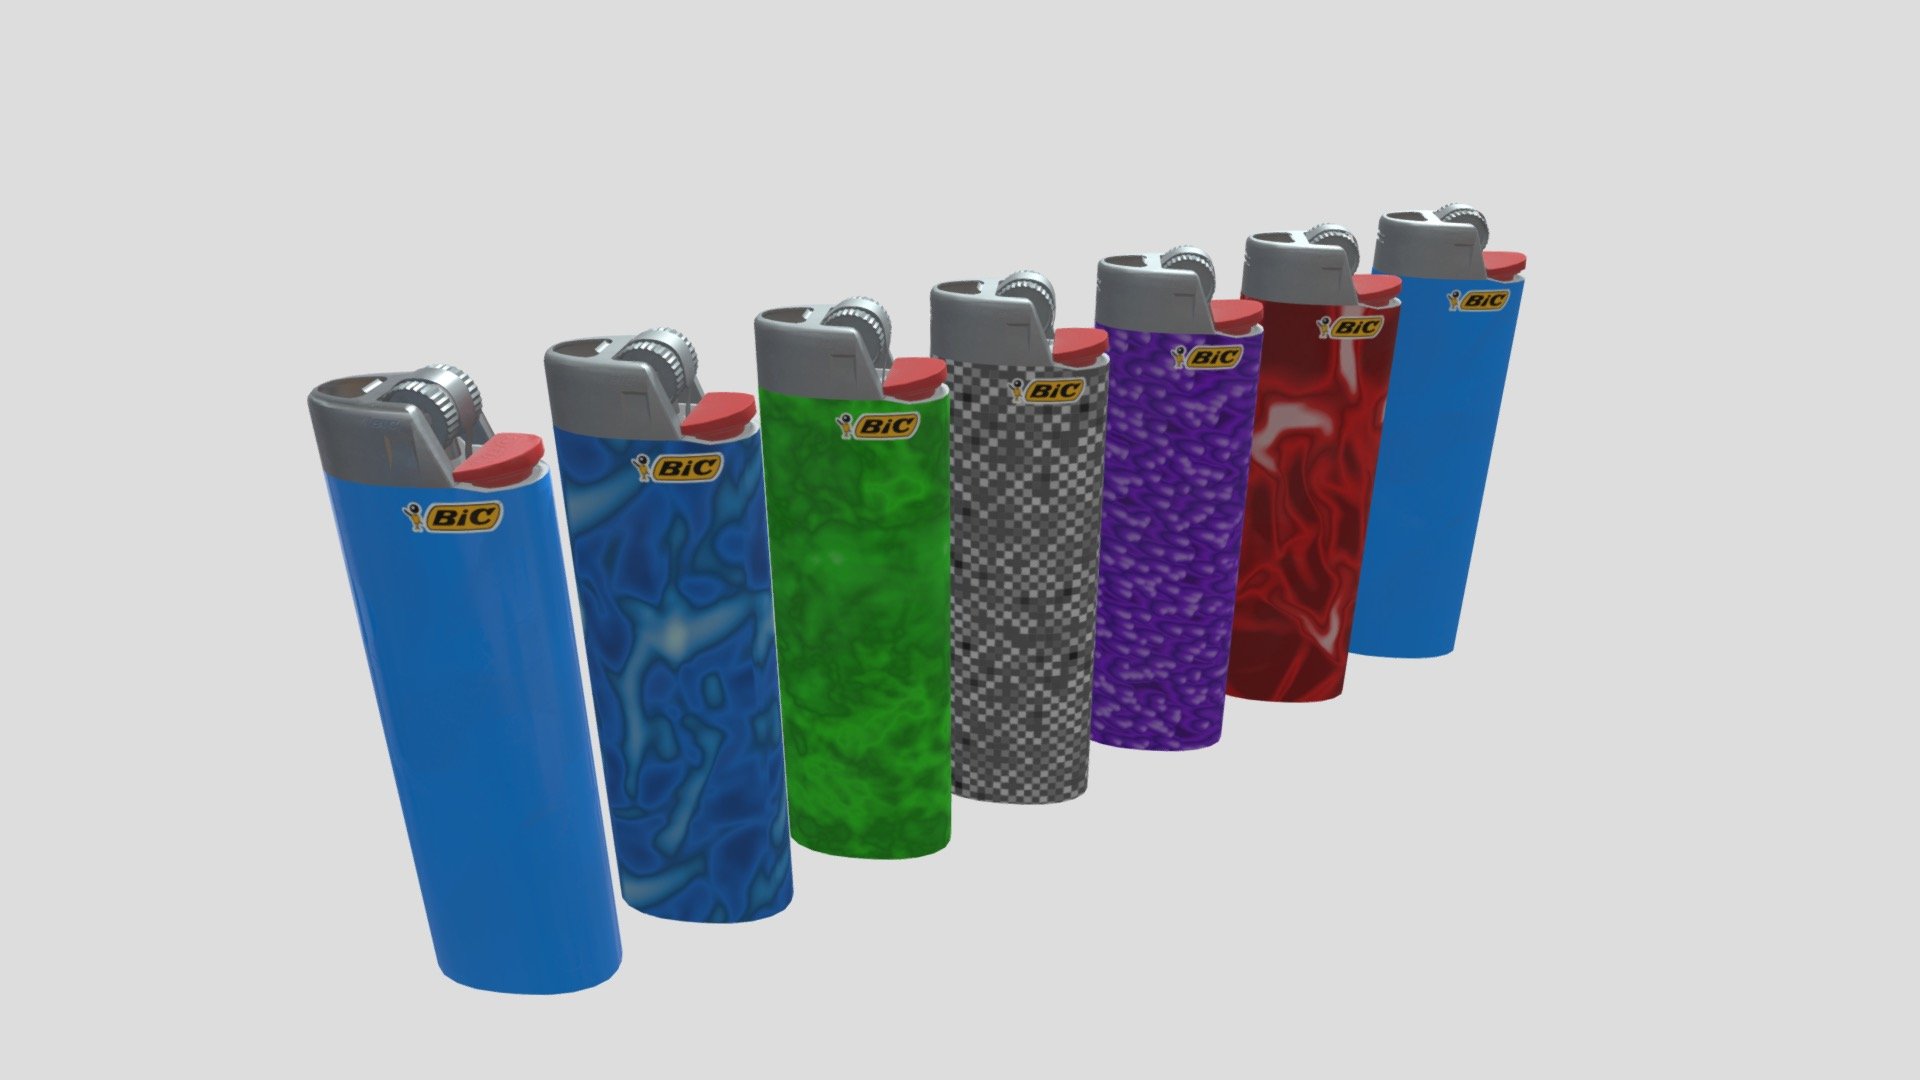 This Lighter is perfect as a prop in any scene and is viewable from all angles and distances. This Has multiple pattern variations that can be manipulated with a Hue/Saturation node for Infinite Color ways.

This Includes:

The Mesh
4K and 2K Texture Set (albedo, Roughness, Metallic, Normal)
7 Variations (Blue Pattern, Red Pattern, Green pattern, Grey Pattern, Purple Pattern, Plain, Dirty)
The Mesh is UV Unwrapped with vertex Colors for easy retexturing 3d model